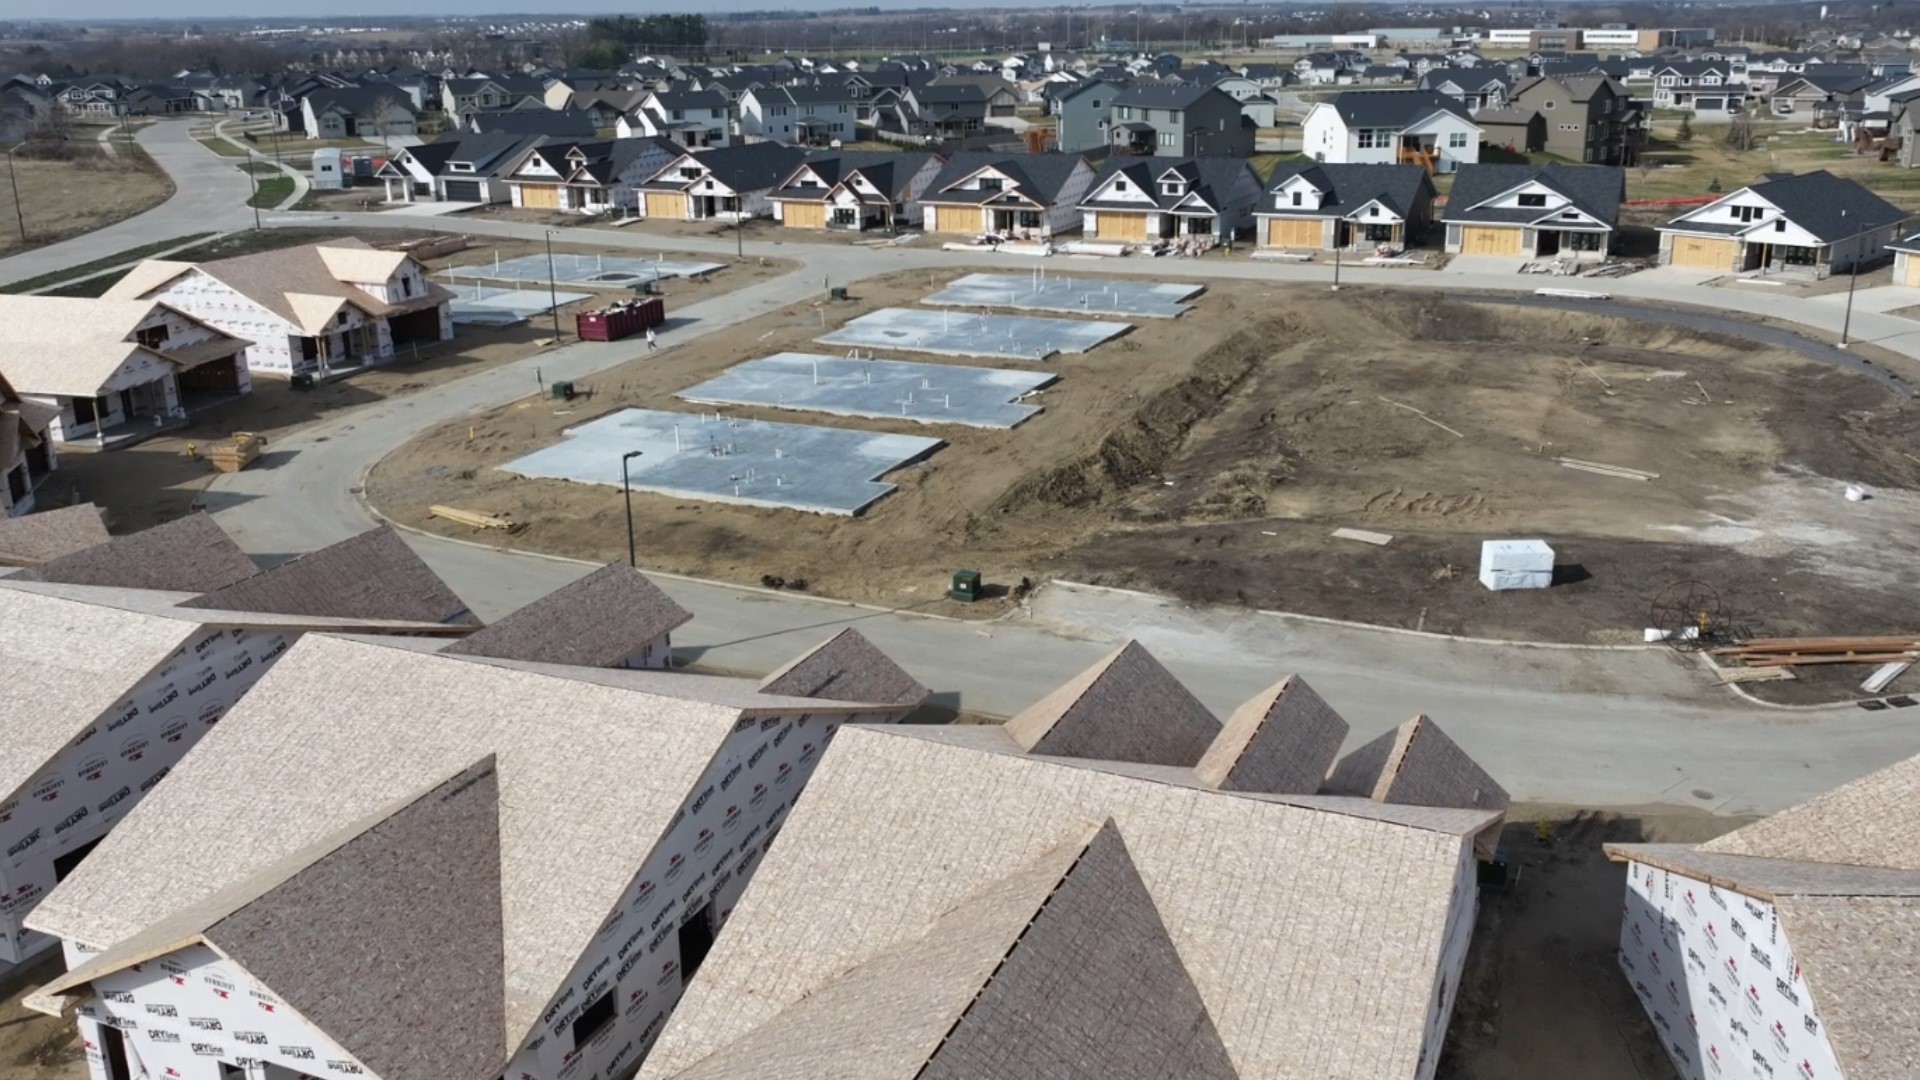 The Estates of Waukee were advertised as a 55+ housing community. But the developer of the project has applied, and since been denied, for its bankruptcy filings.